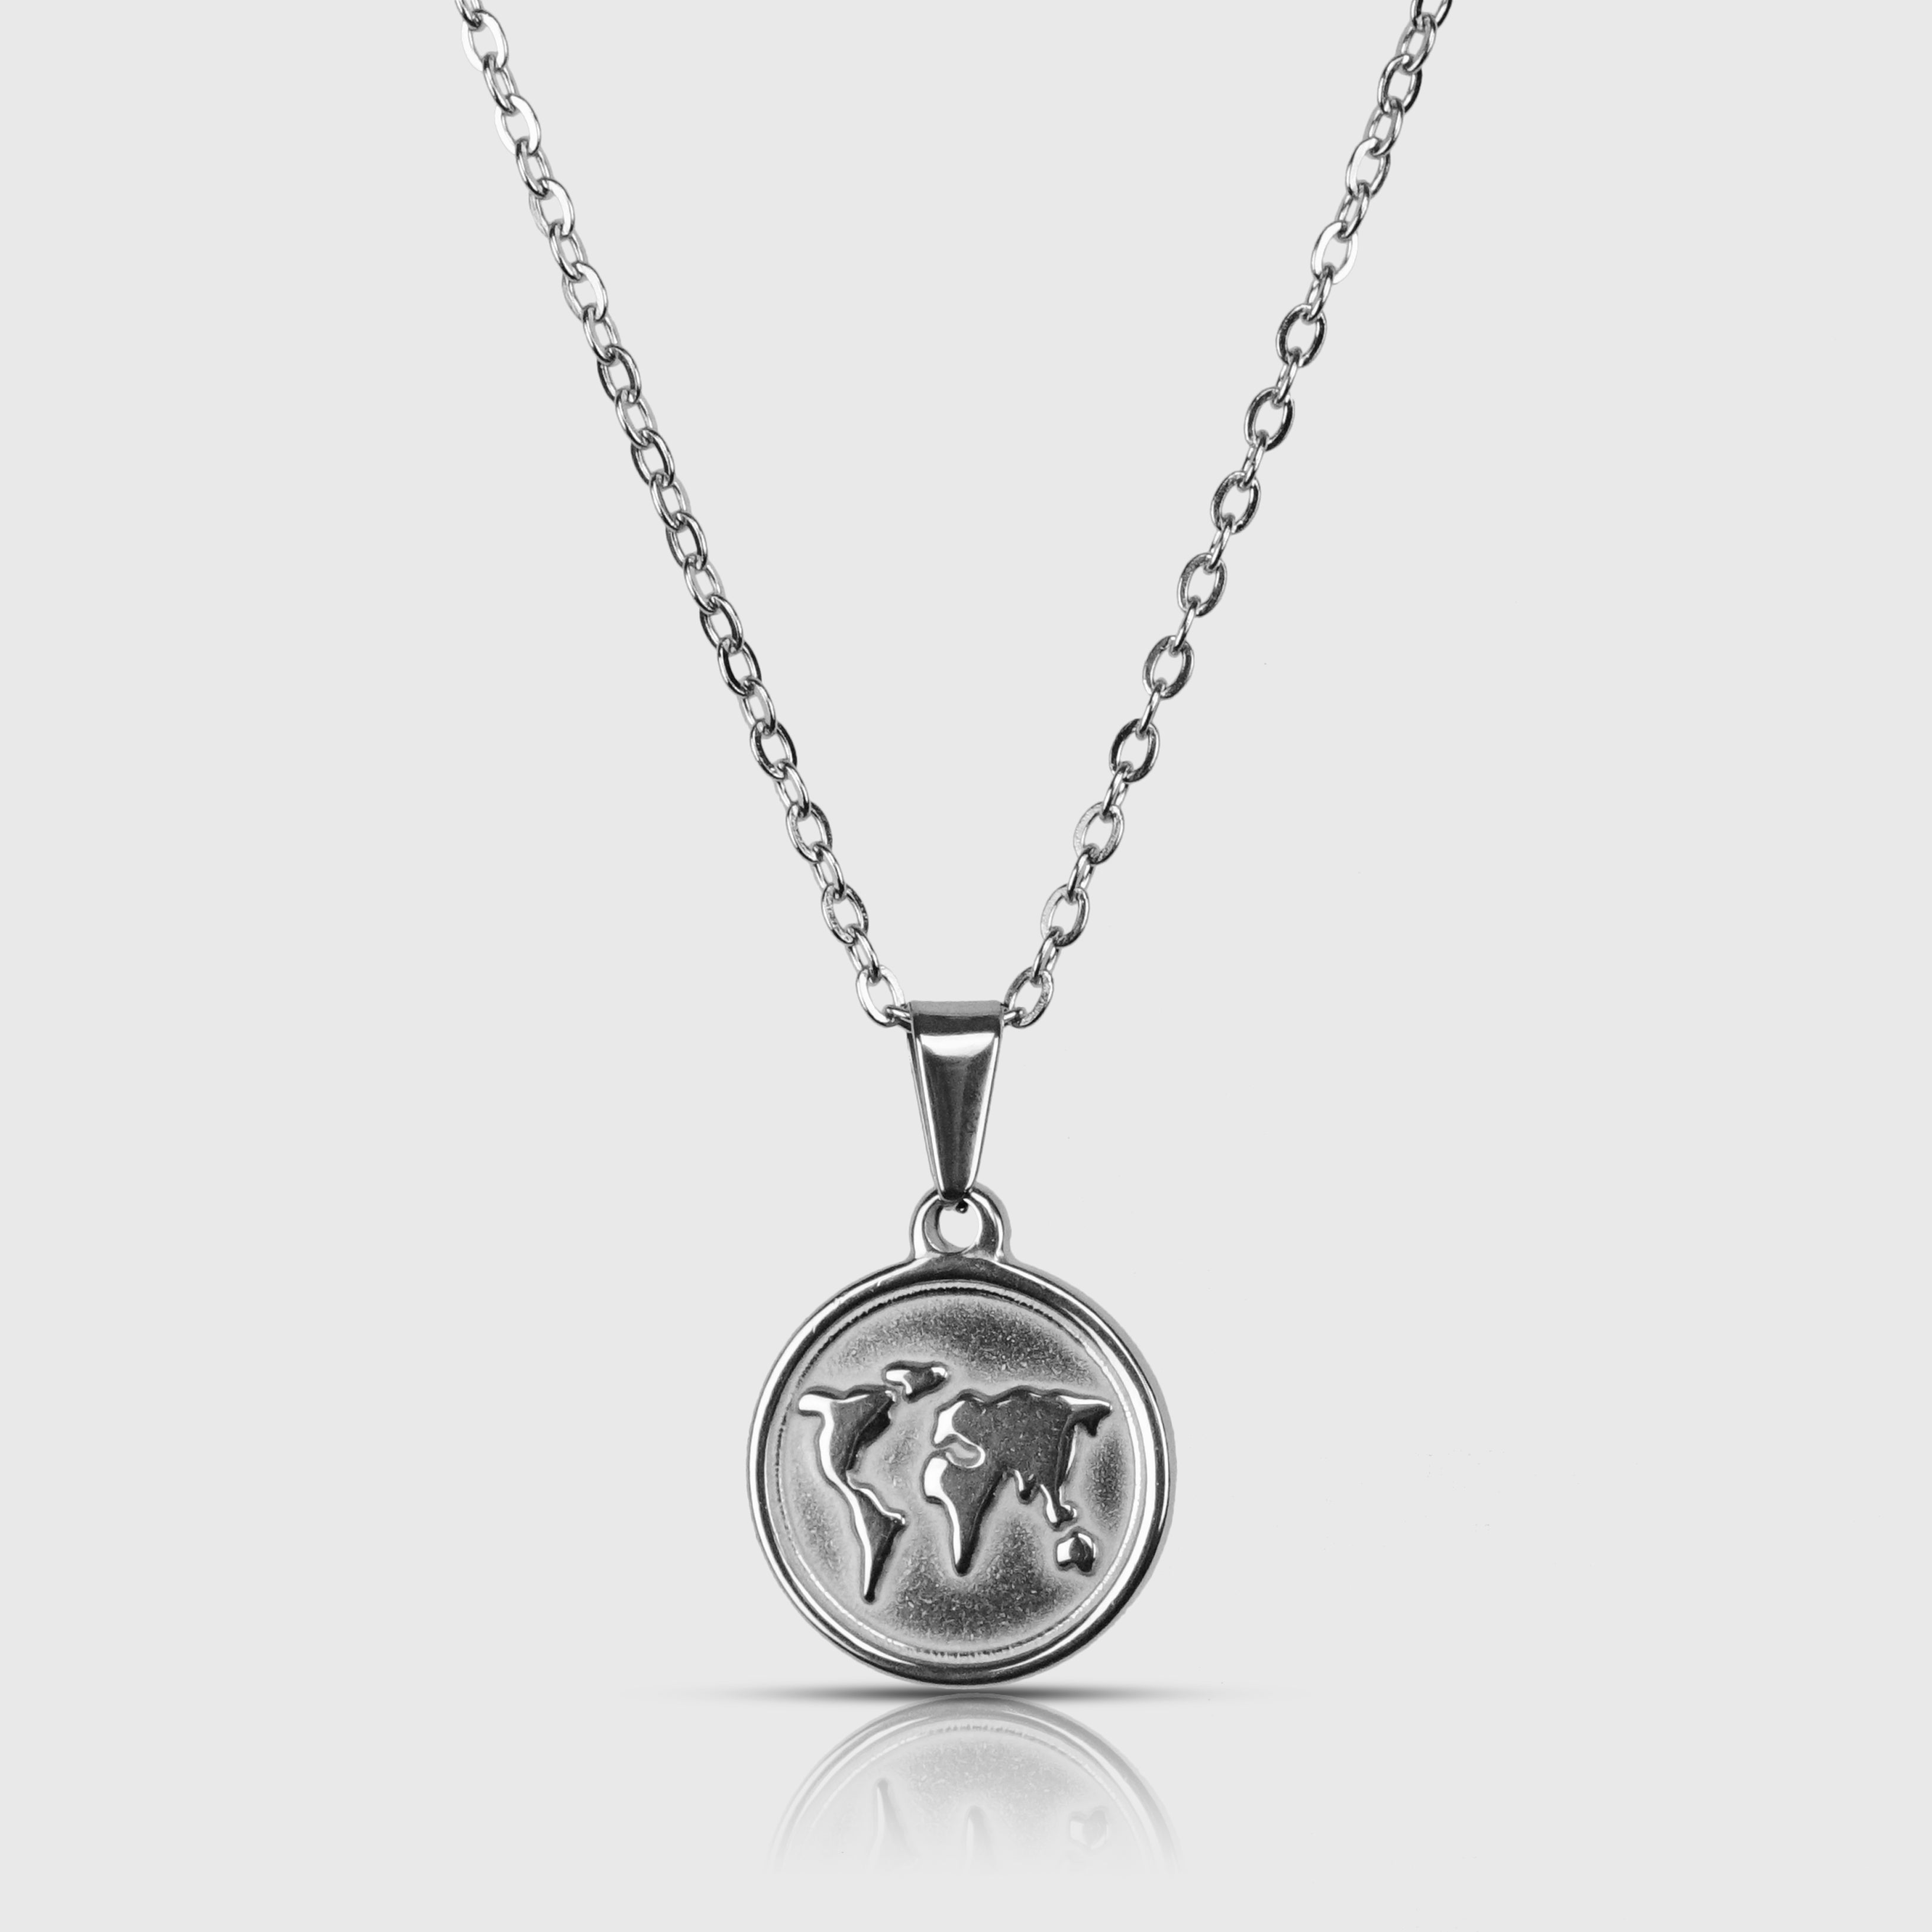 WORLD NECKLACE - SILVER